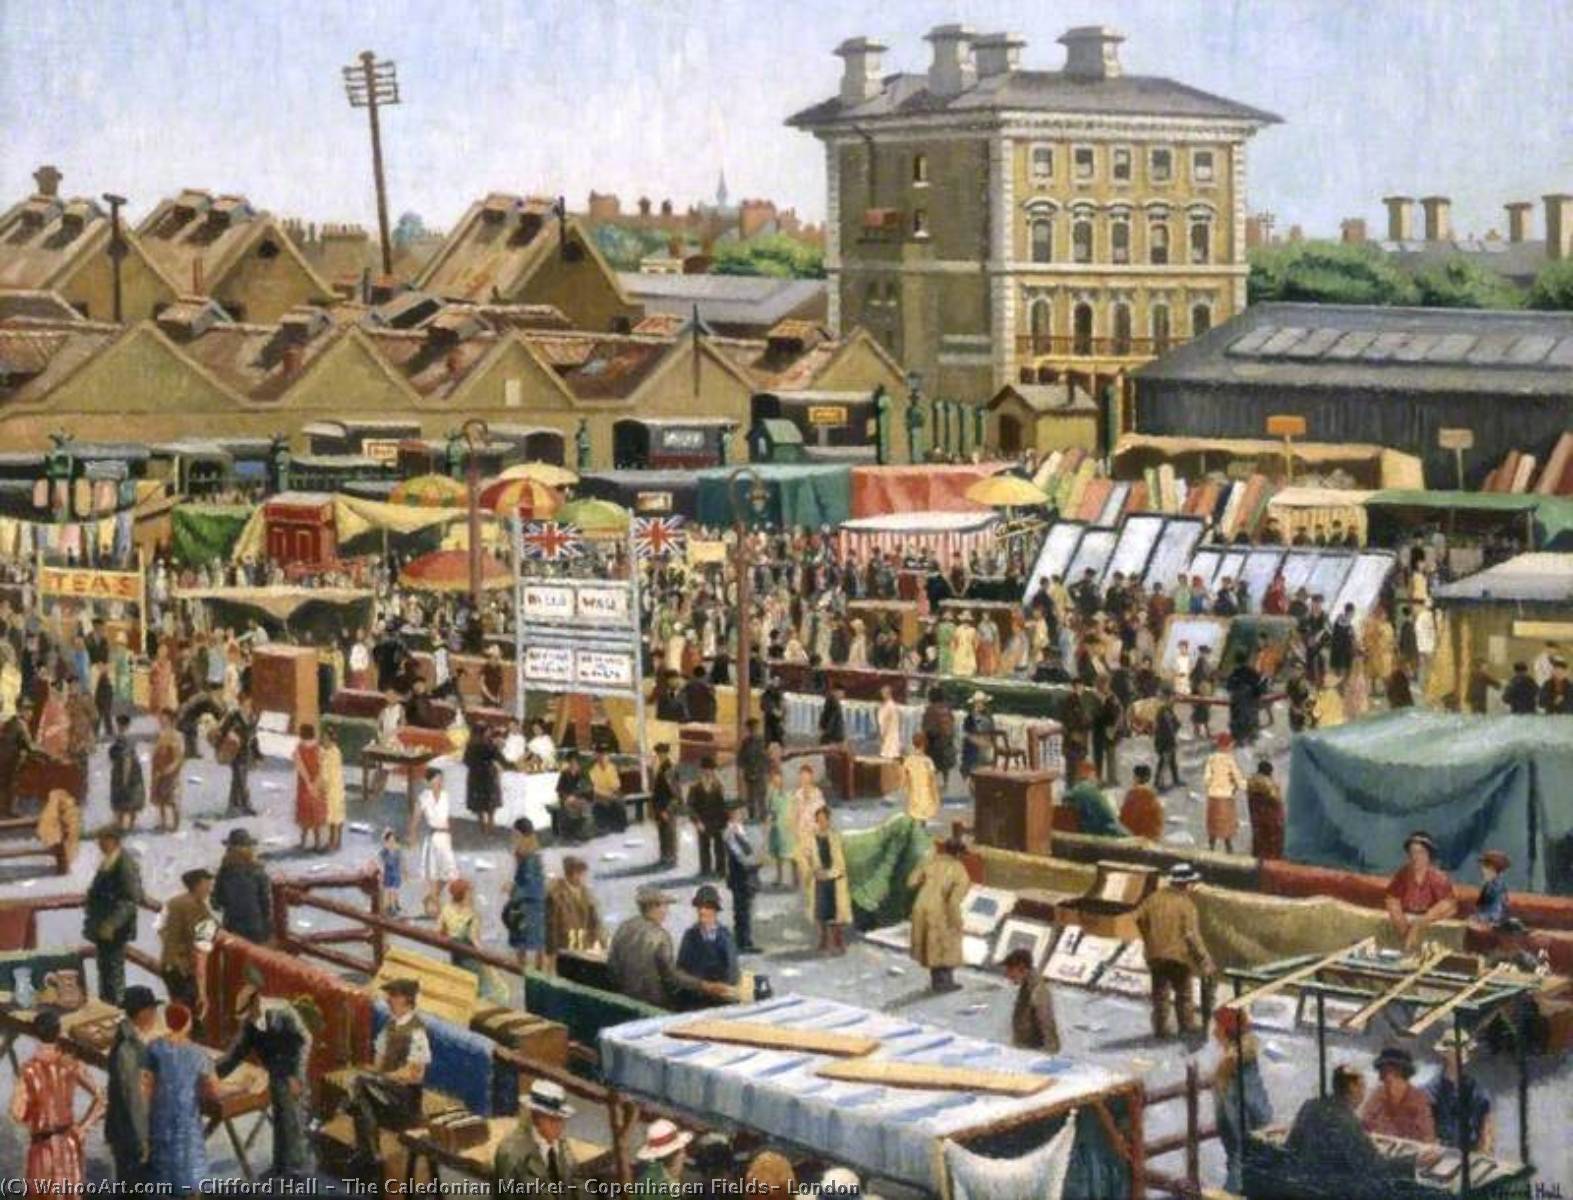 Order Oil Painting Replica The Caledonian Market, Copenhagen Fields, London, 1933 by Clifford Hall (Inspired By) (1904-1973, United Kingdom) | ArtsDot.com